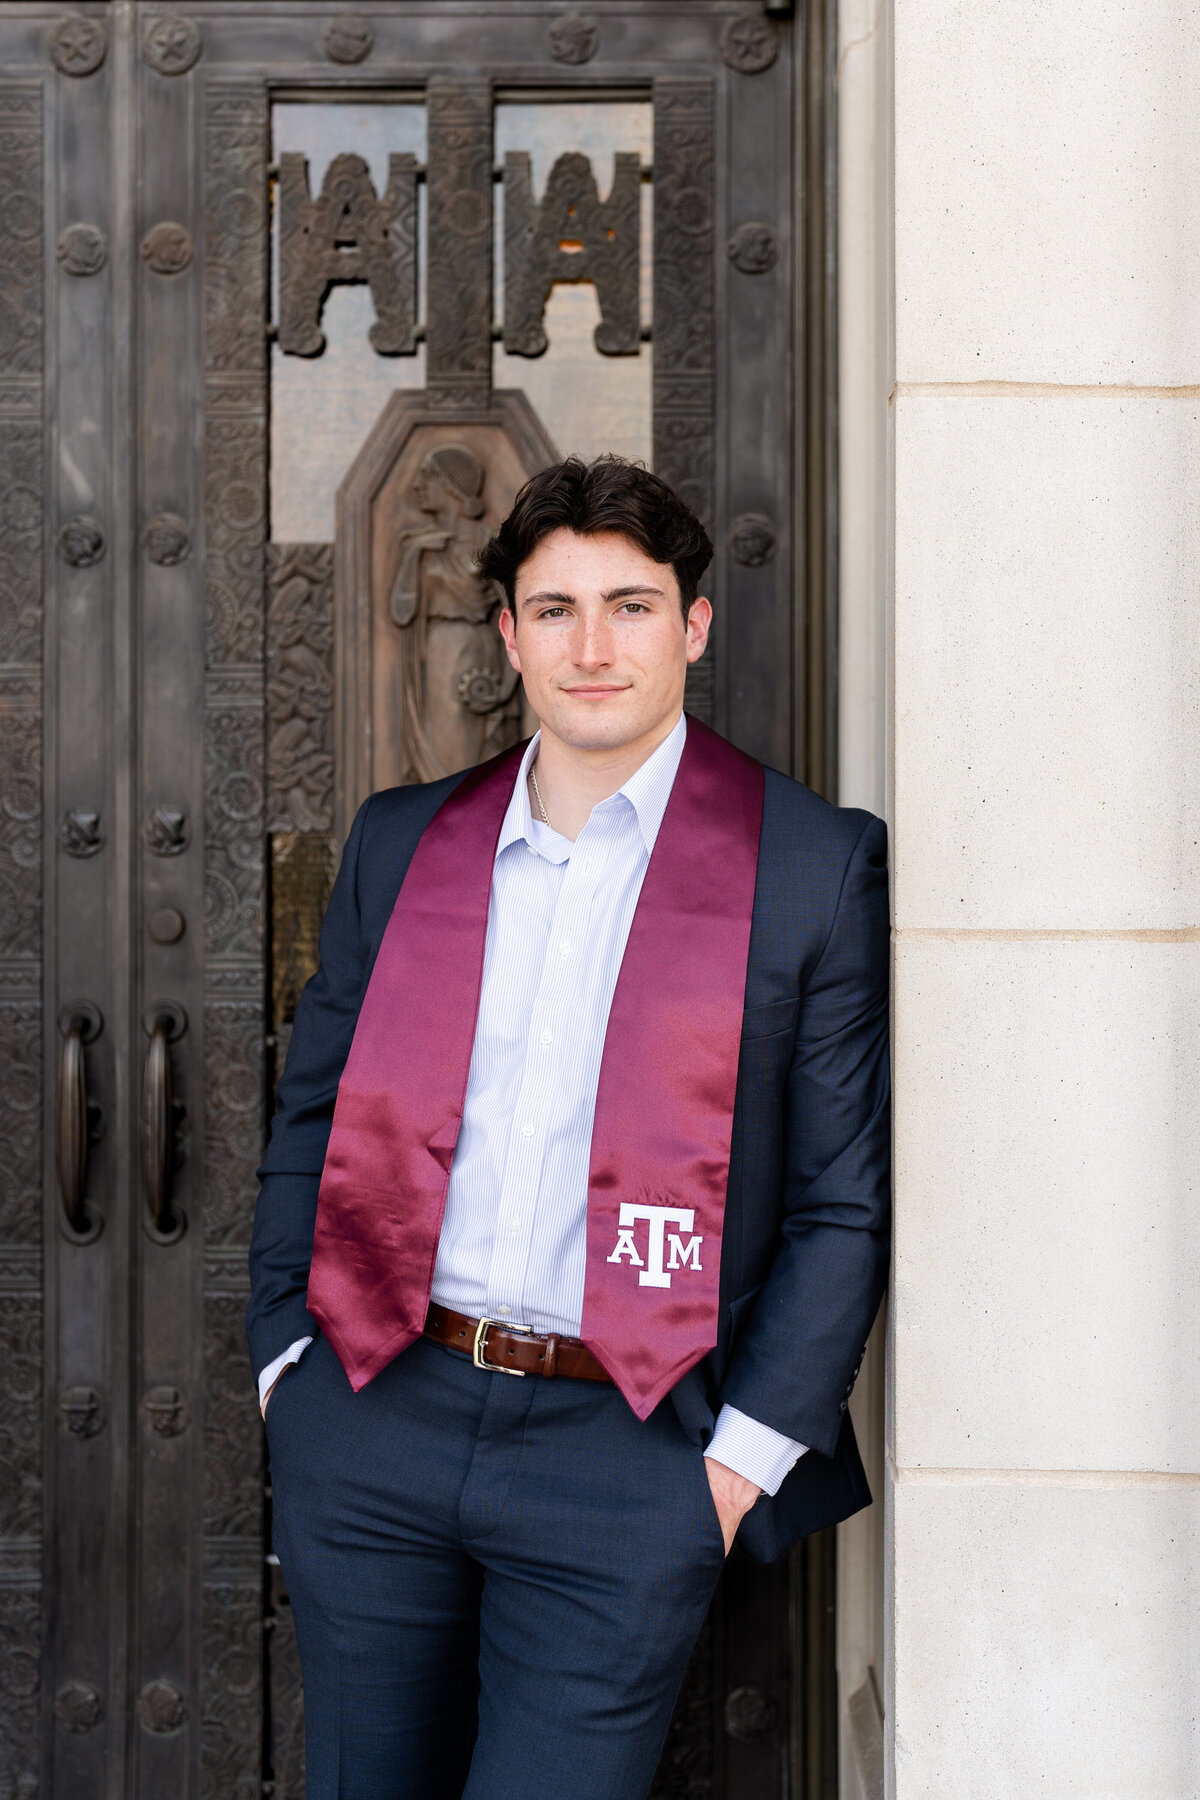 Texas A&M senior guy with a soft smile and hands in pockets leaning against front door of Administration Building with Aggie stole and formal attire